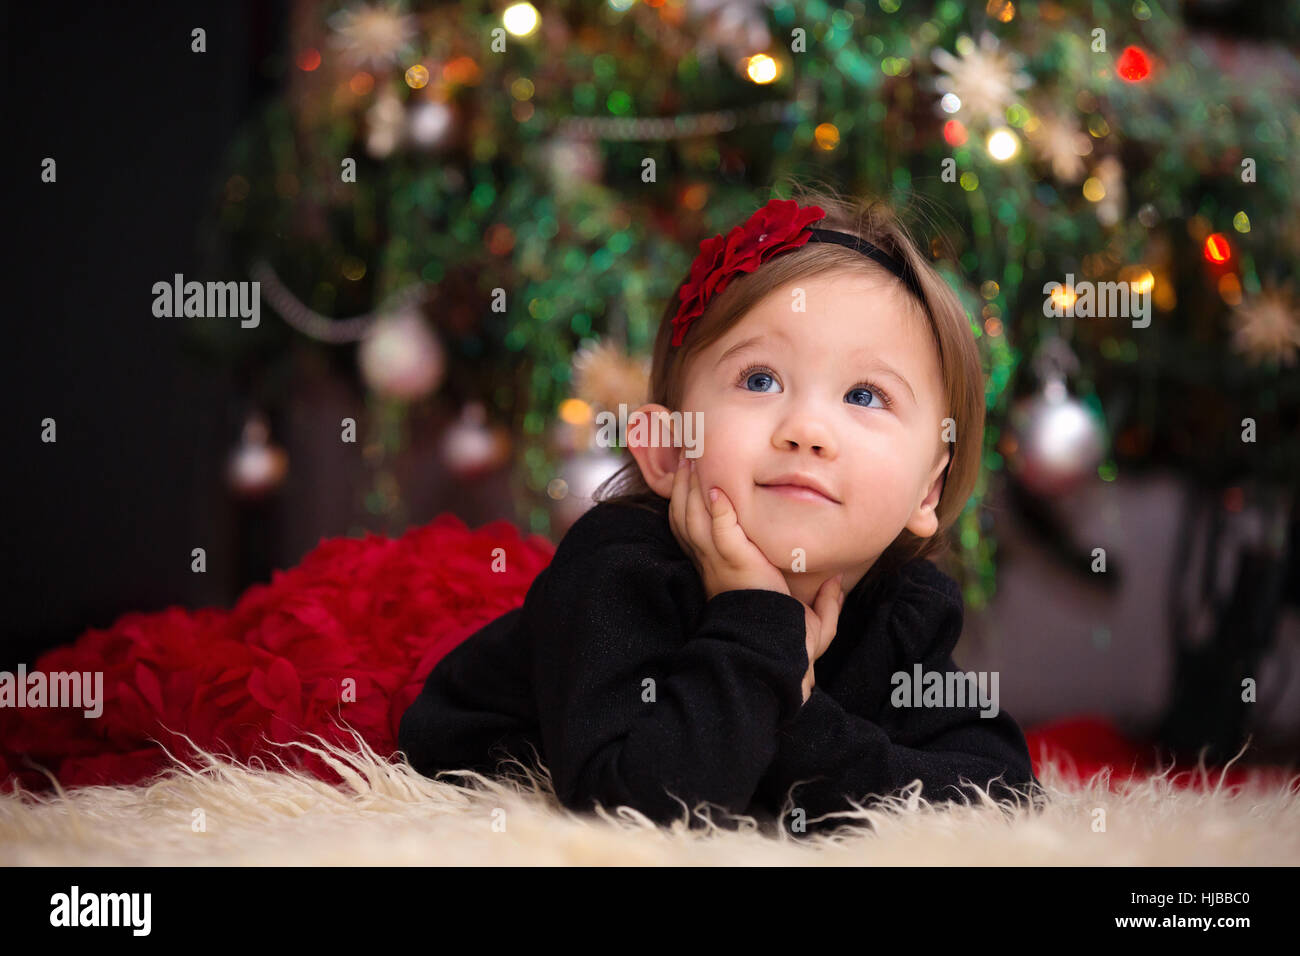 Beautiful Little Girl Looking Up Expecting Her Christmas Gifts Stock Photo